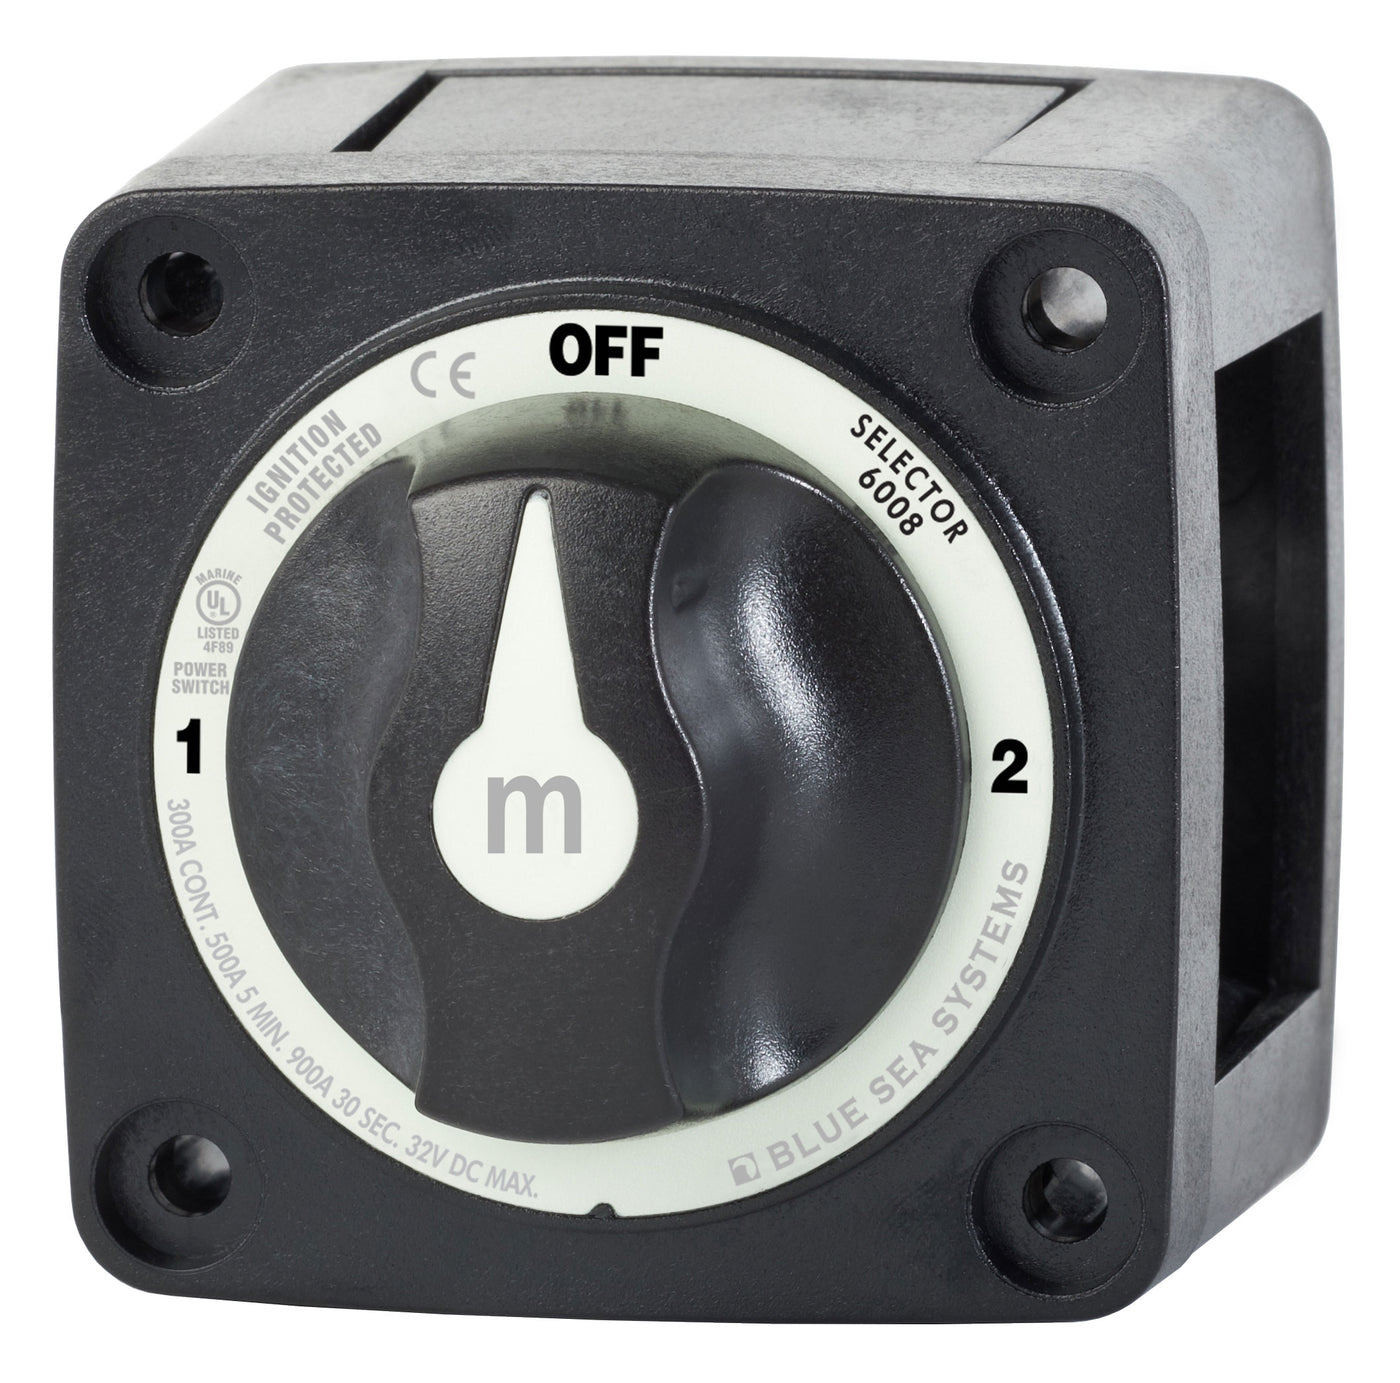 Blue Sea 6008200 m-Series Selector 3 Position Battery Switch - Black